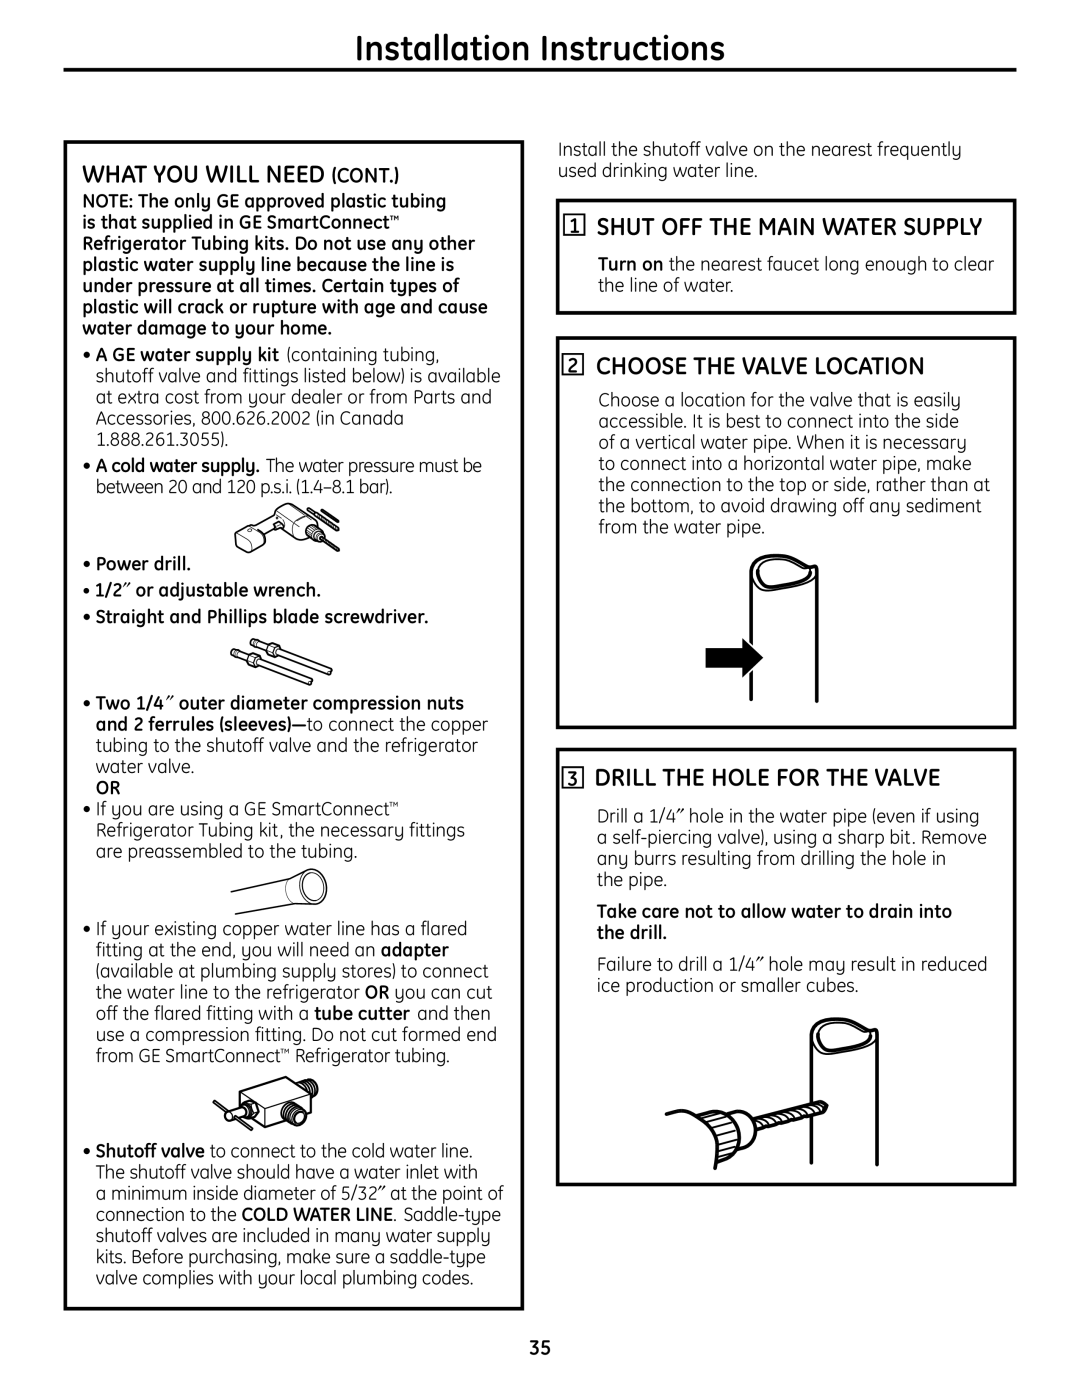 GE PFSS6SMXSS operating instructions What You Will Need Cont, Shut Off The Main Water Supply, Choose The Valve Location 